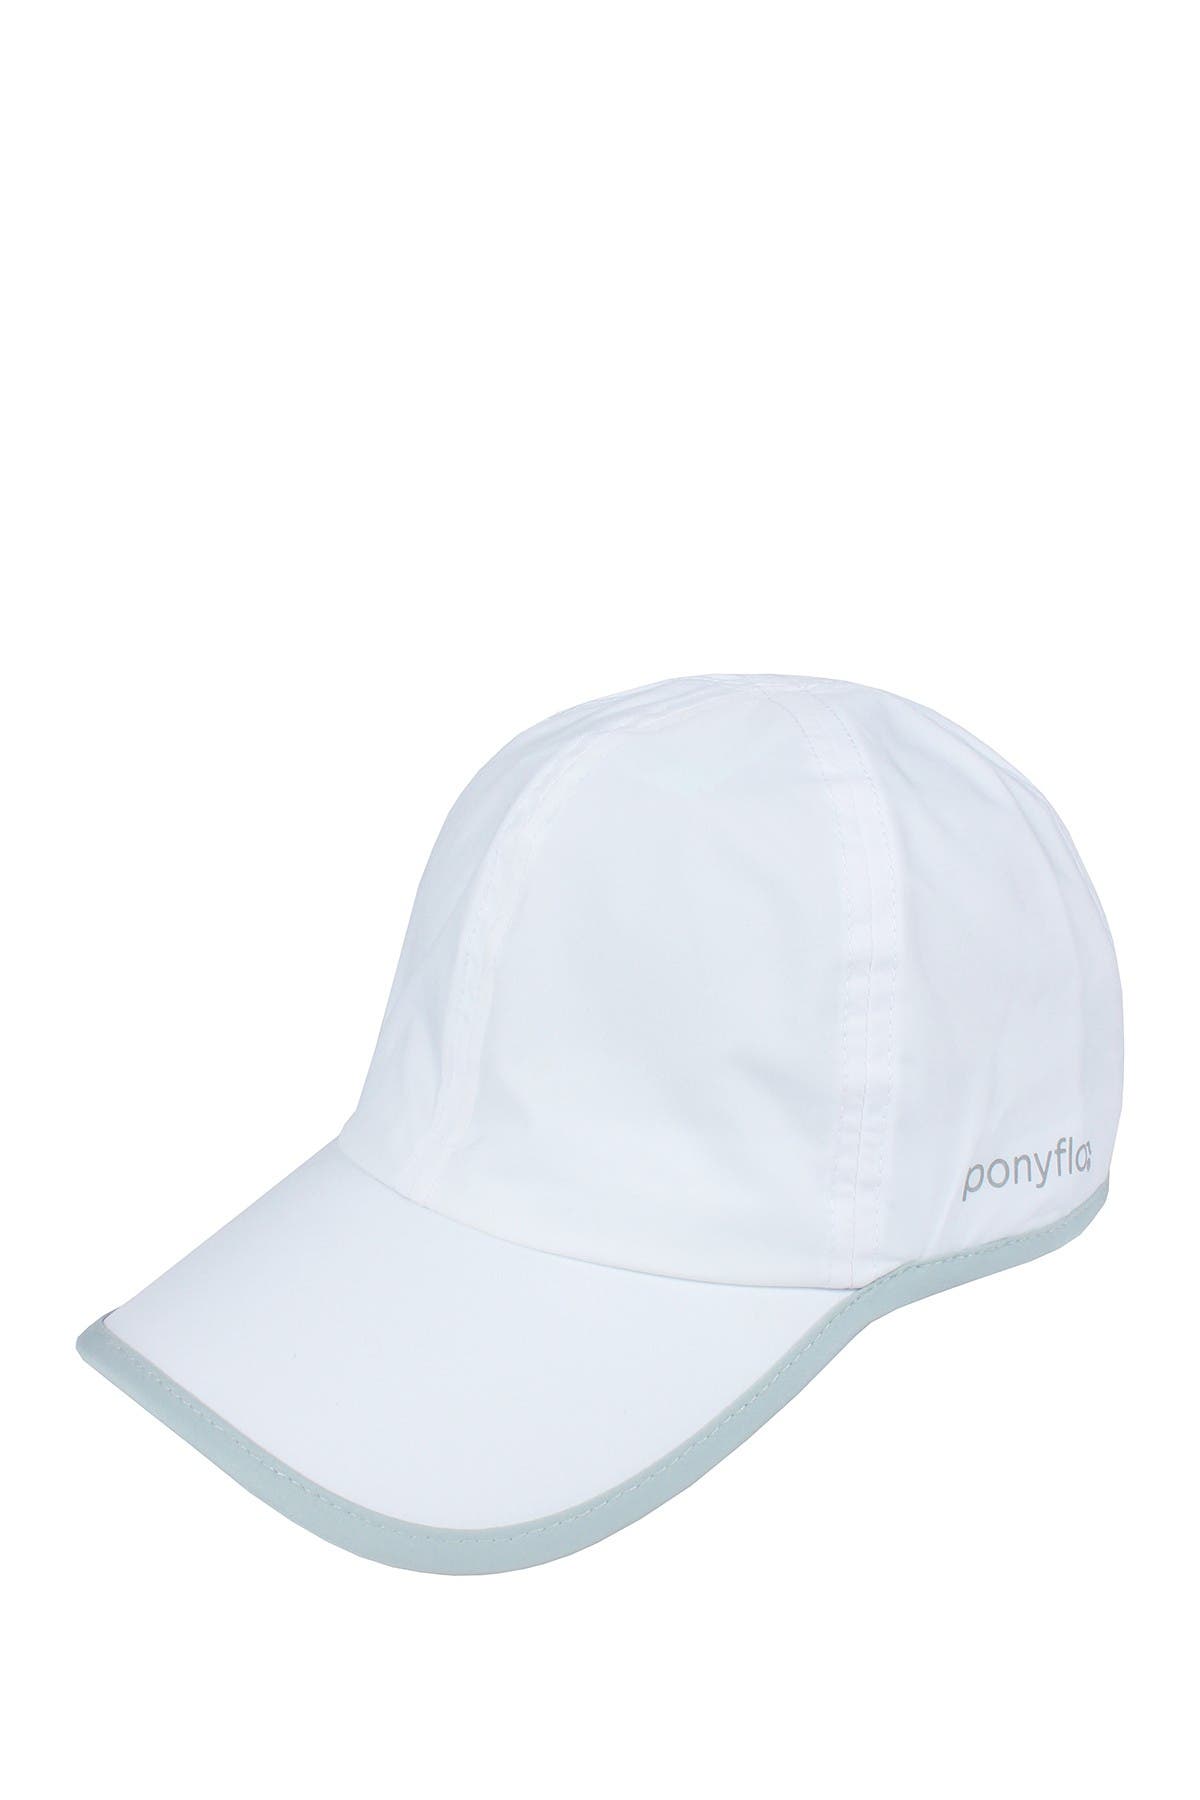 David & Young Water Resistant Active Ponyflo Hat In White/mint